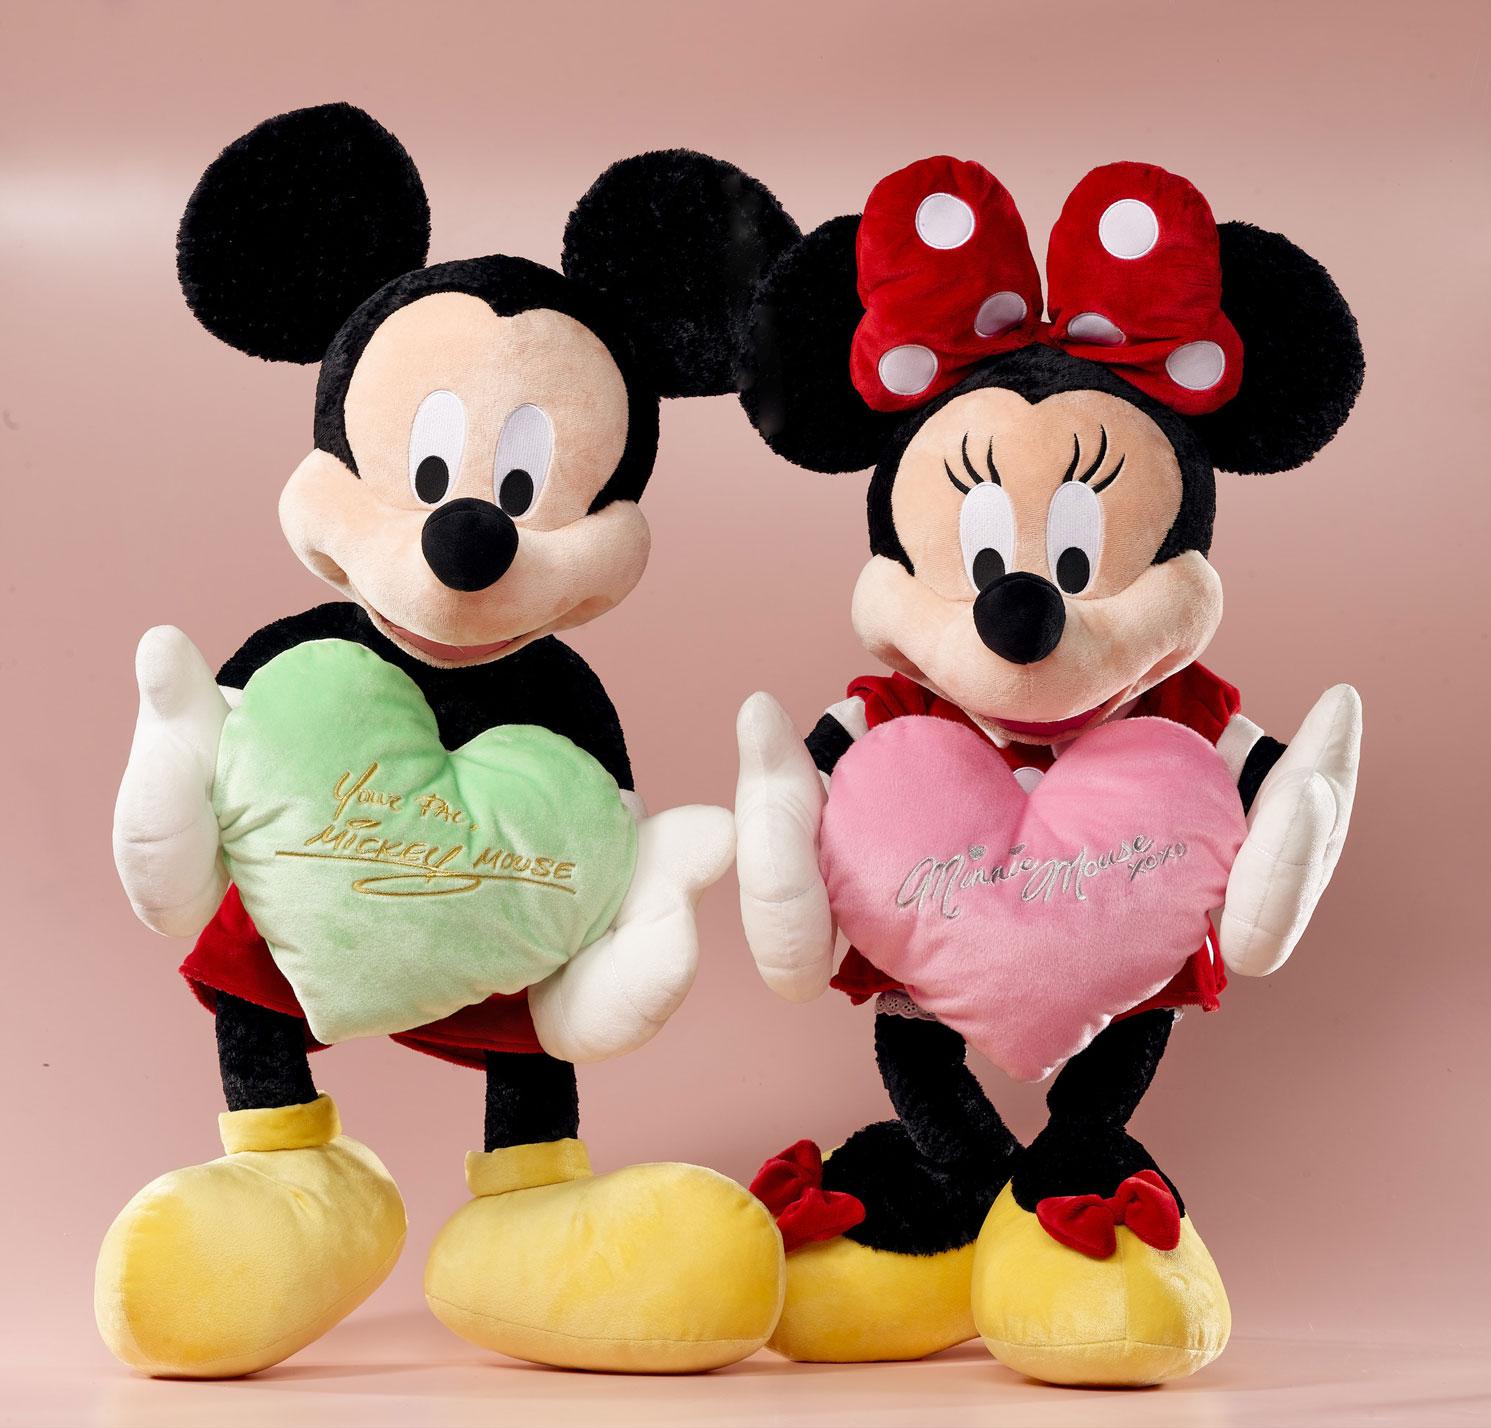 Free Mickey Mouse And Minnie Mouse Love, Download Free Clip Art, Free Clip Art on Clipart Library